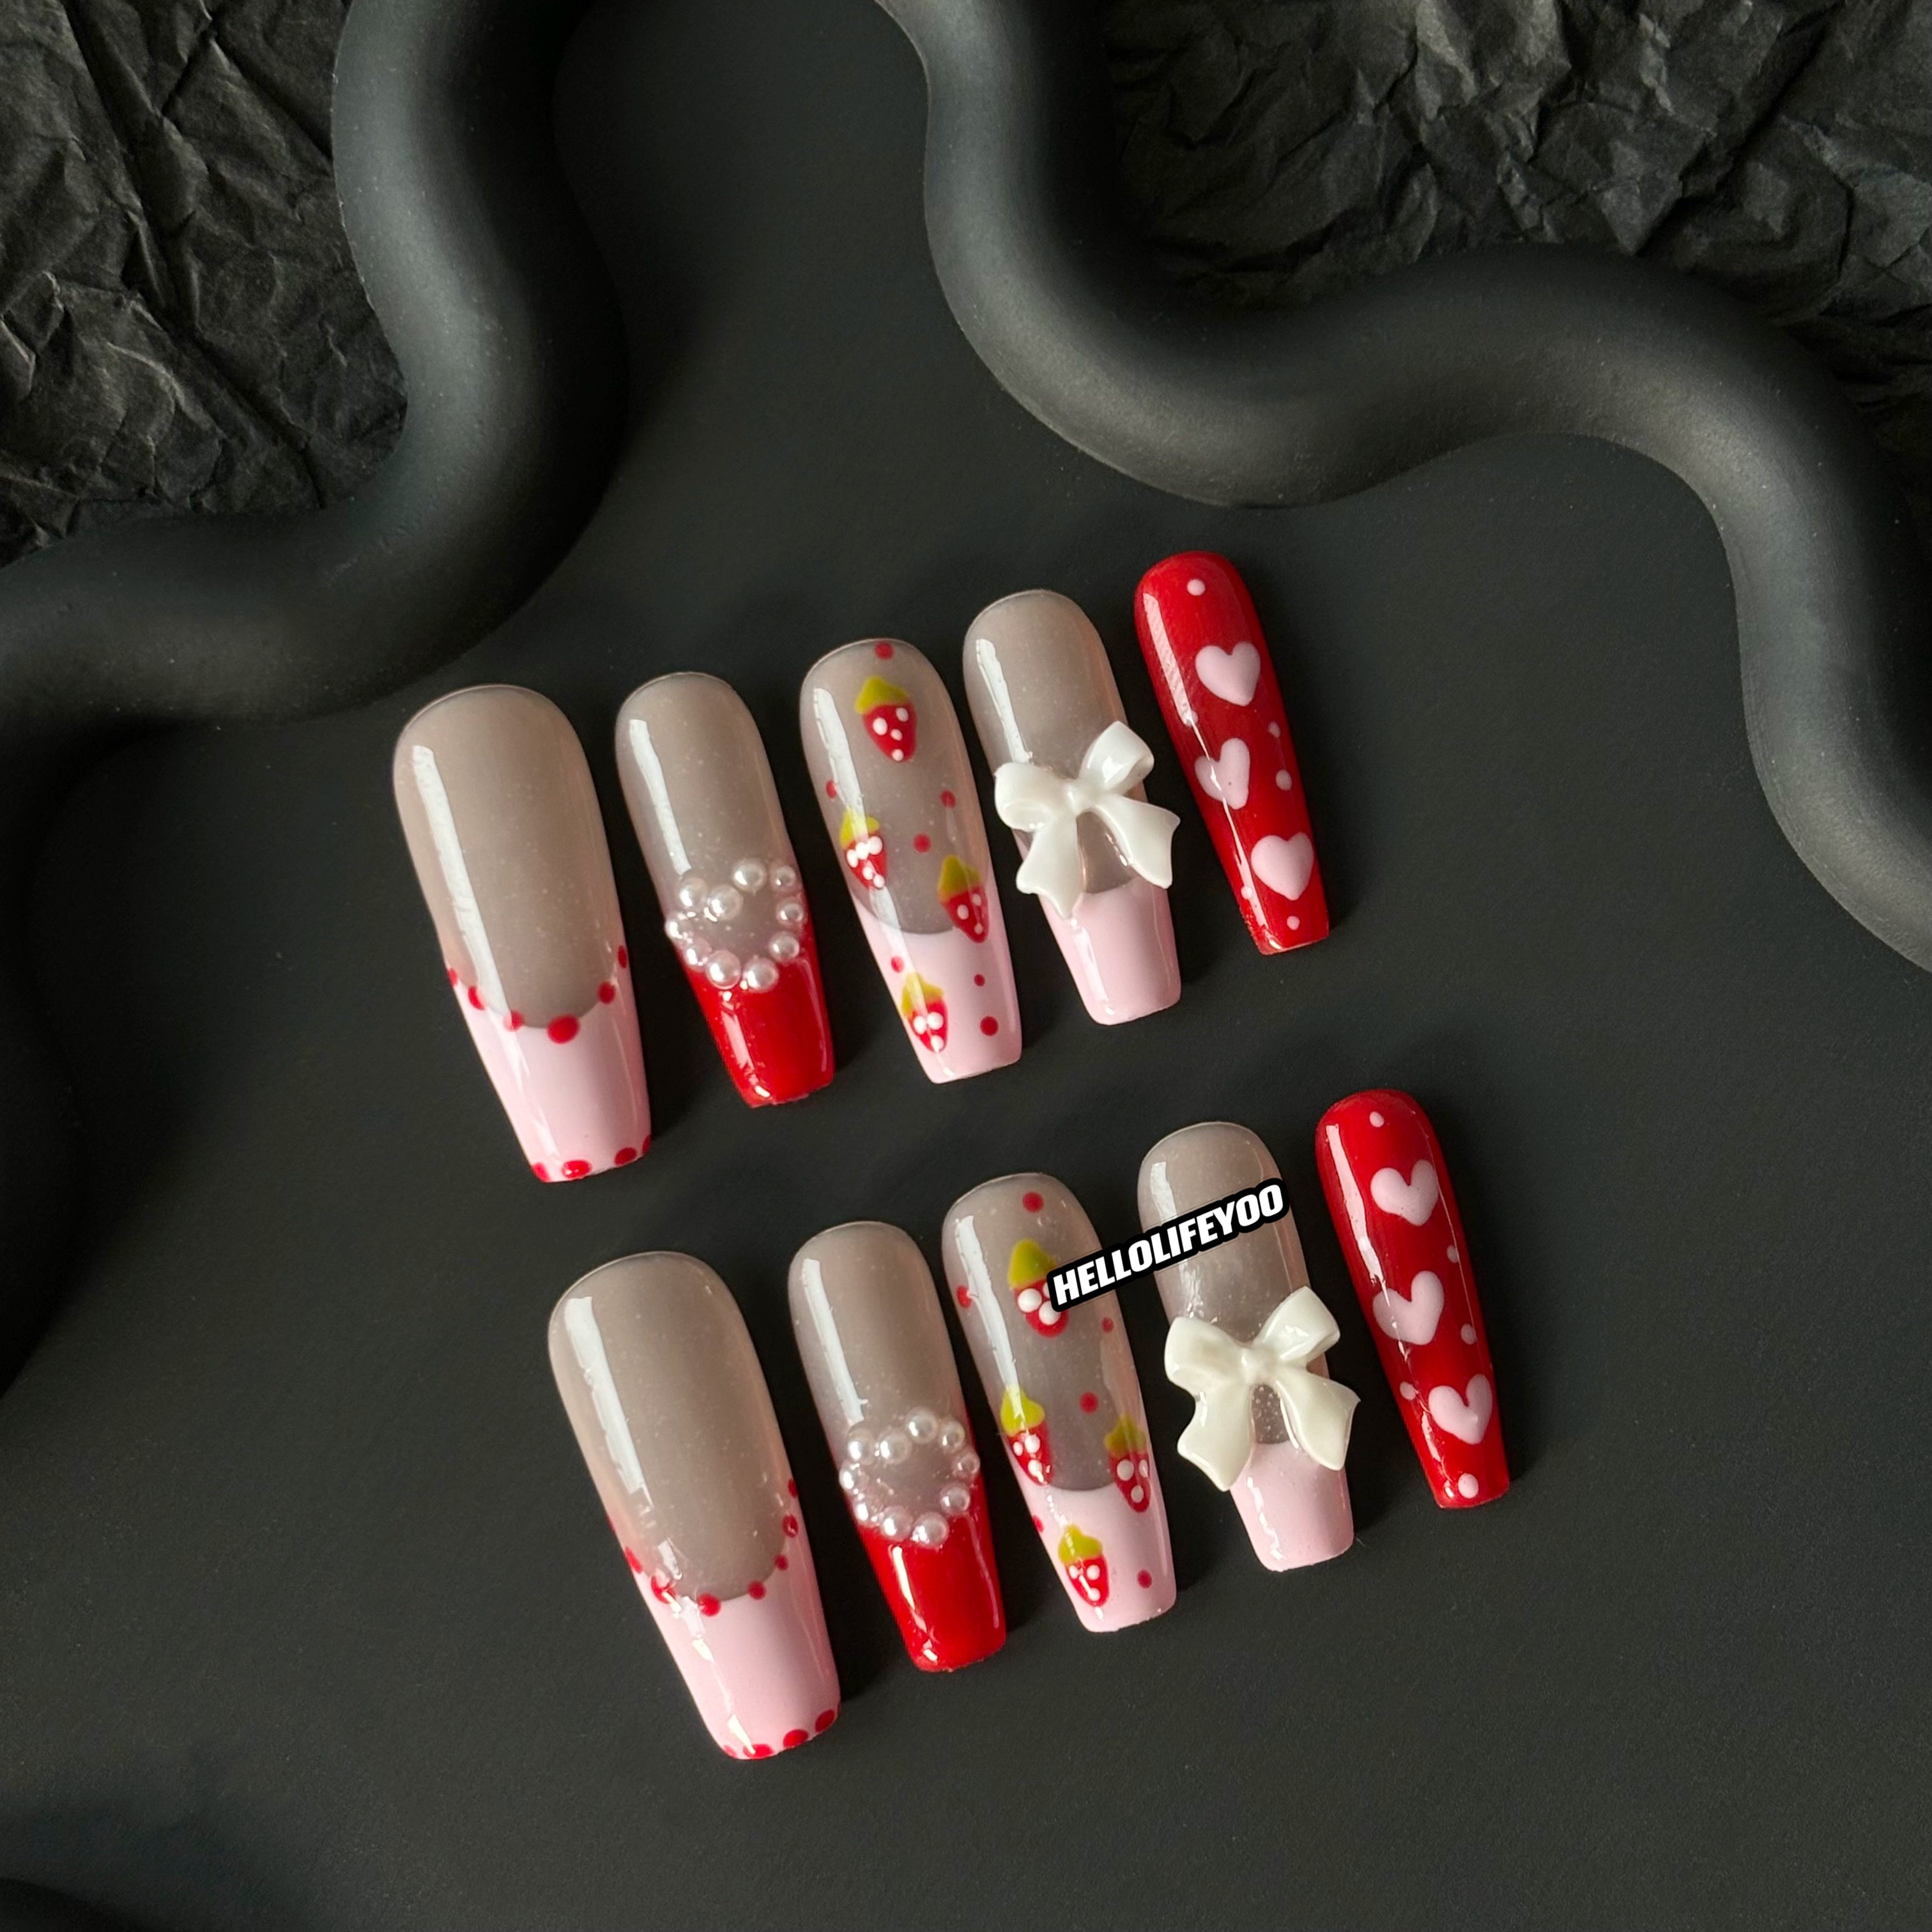 PINK STRAWBERRY-TEN PIECES OF HANDCRAFTED PRESS ON NAIL